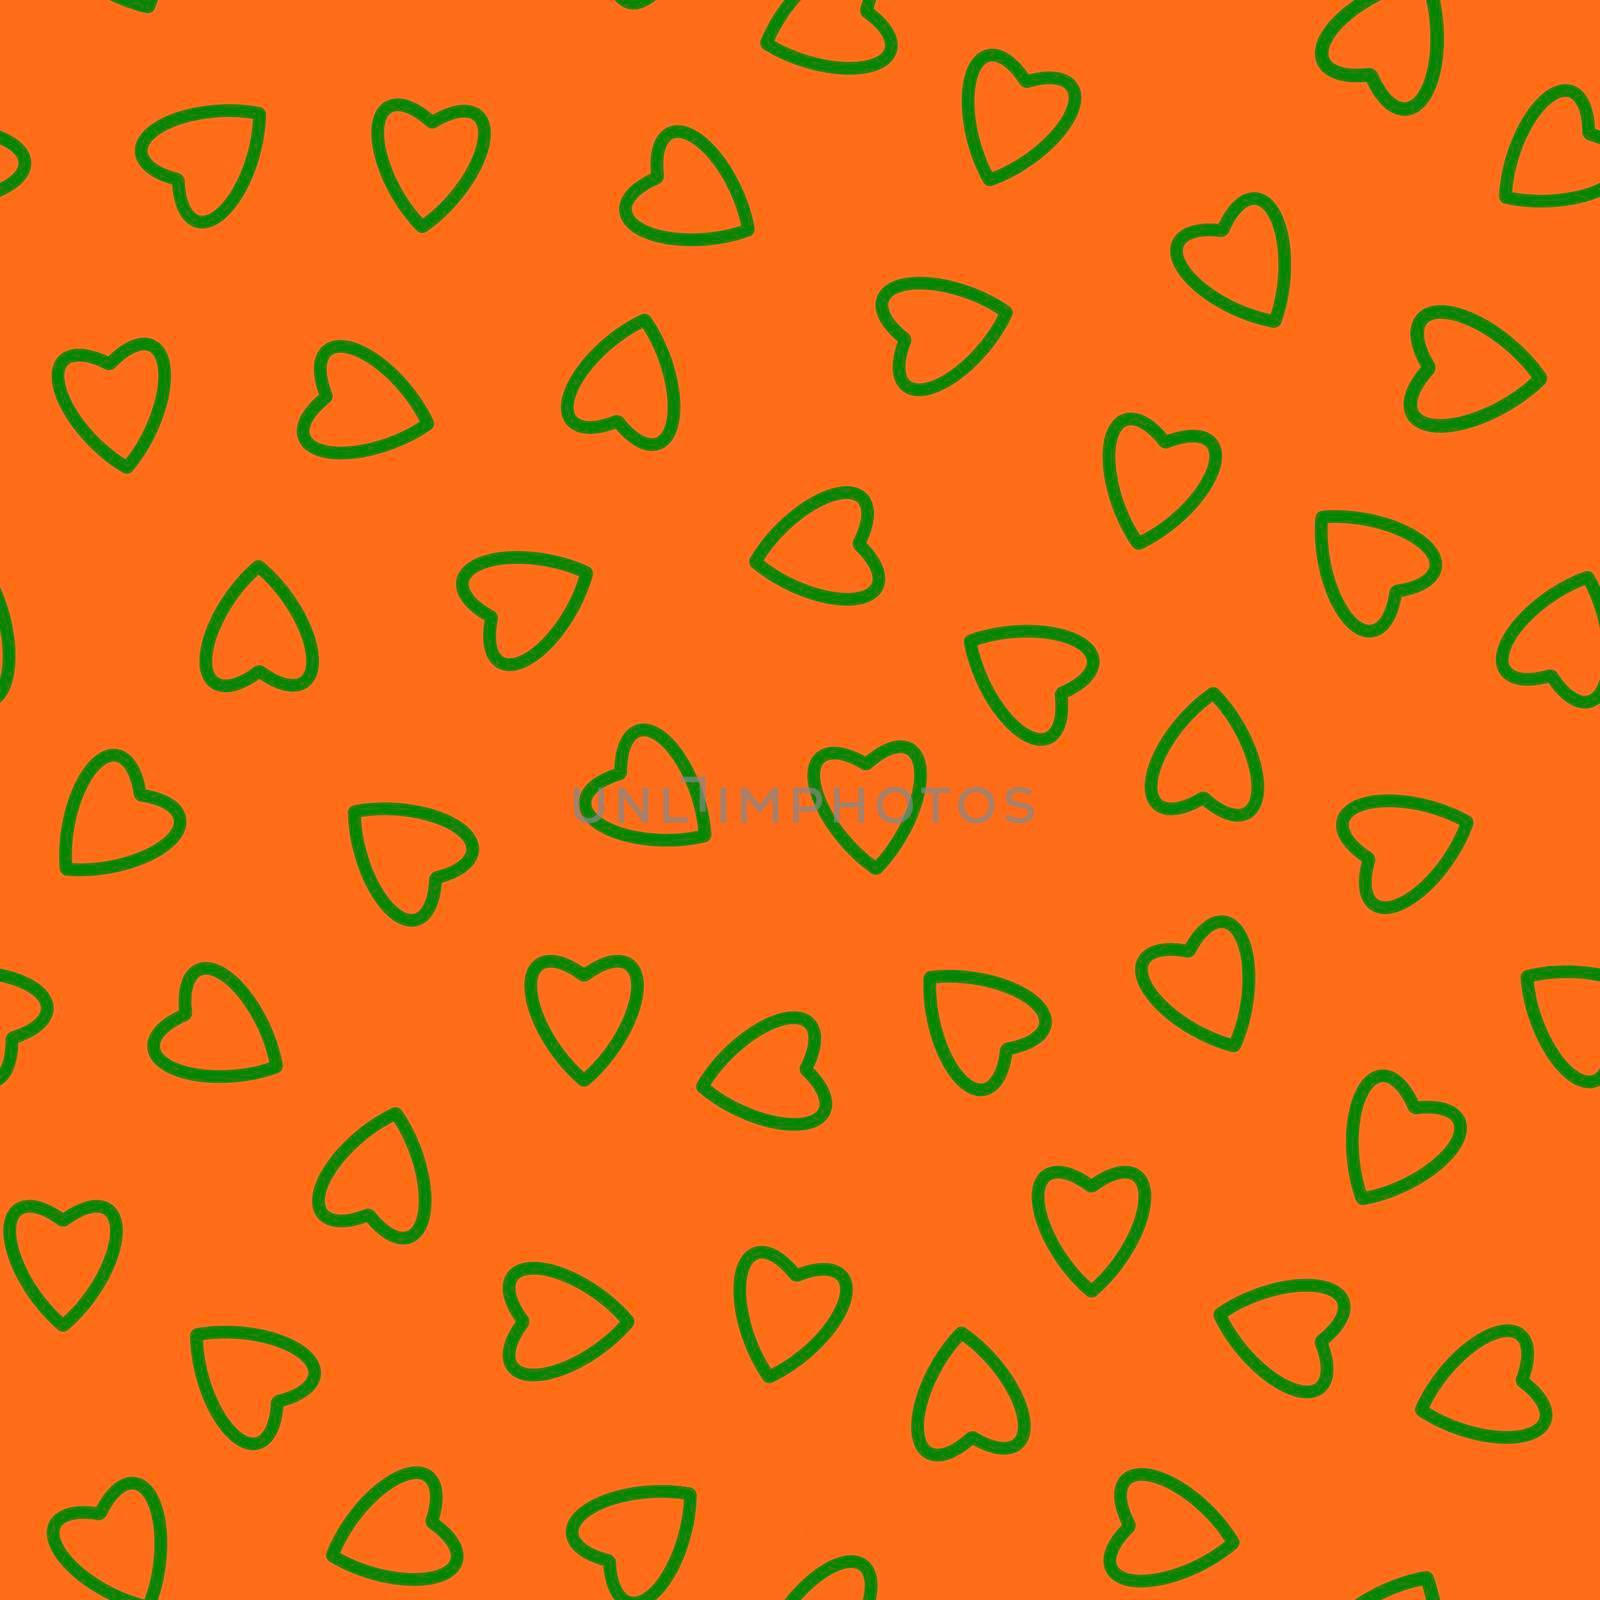 Simple hearts seamless pattern,endless chaotic texture made of tiny heart silhouettes.Valentines,mothers day background.Great for Easter,wedding,scrapbook,gift wrapping paper,textiles.Green on orange by Angelsmoon